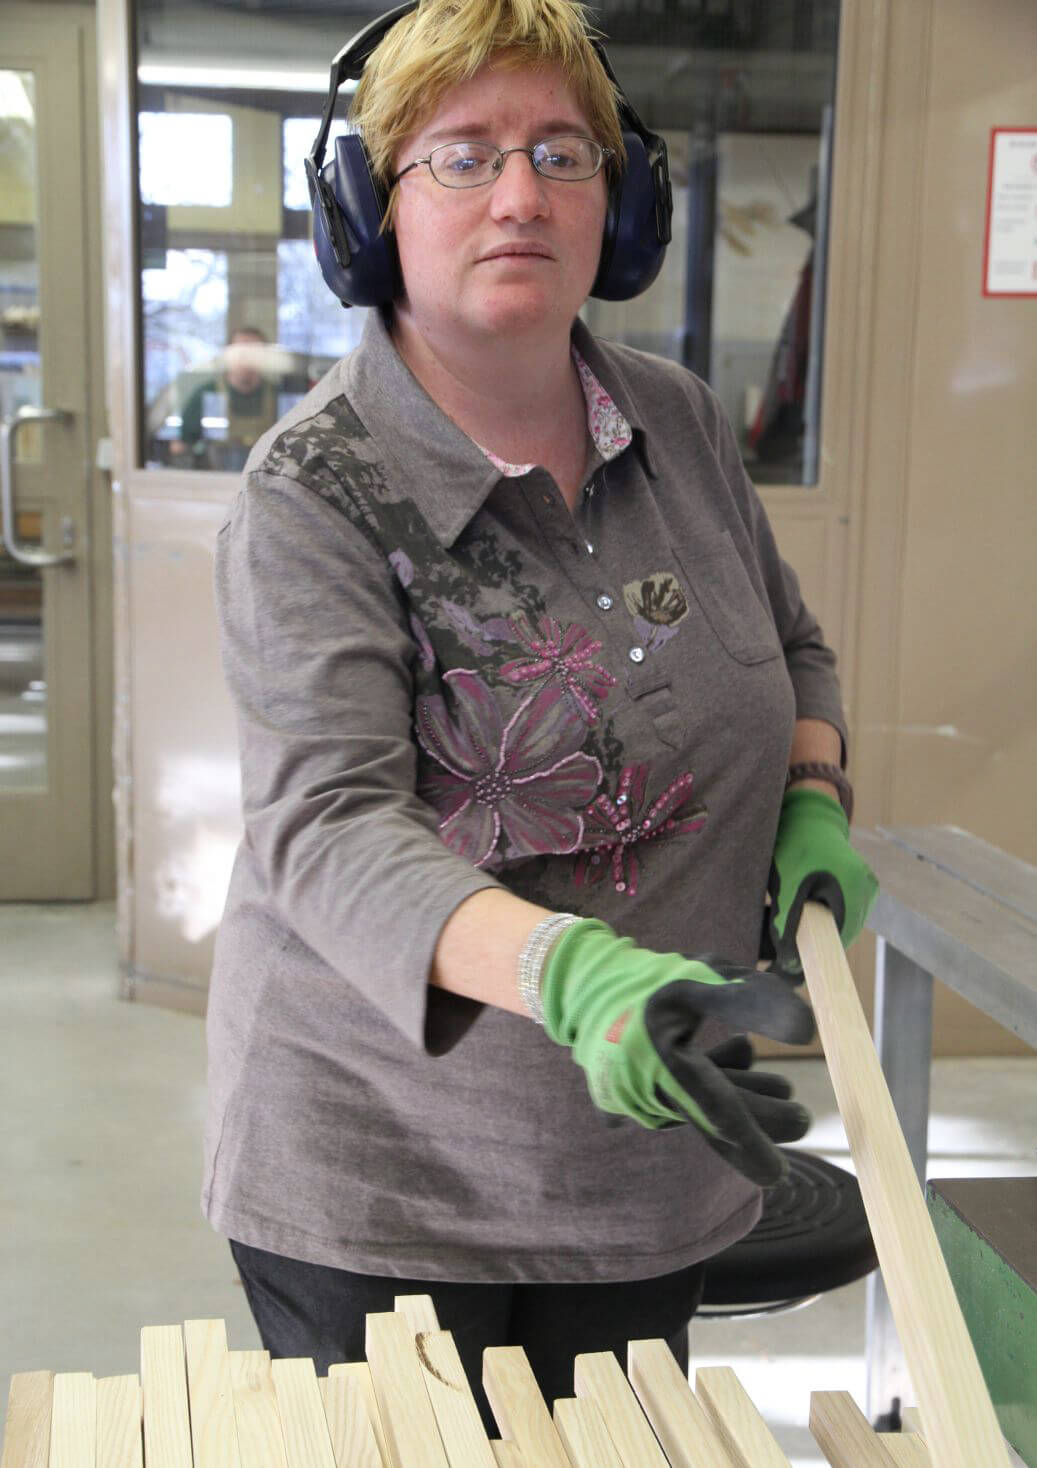 A female Metalog Tools employee wearing green gloves selects a raw birch wood board to be handcrafted into a team building tool